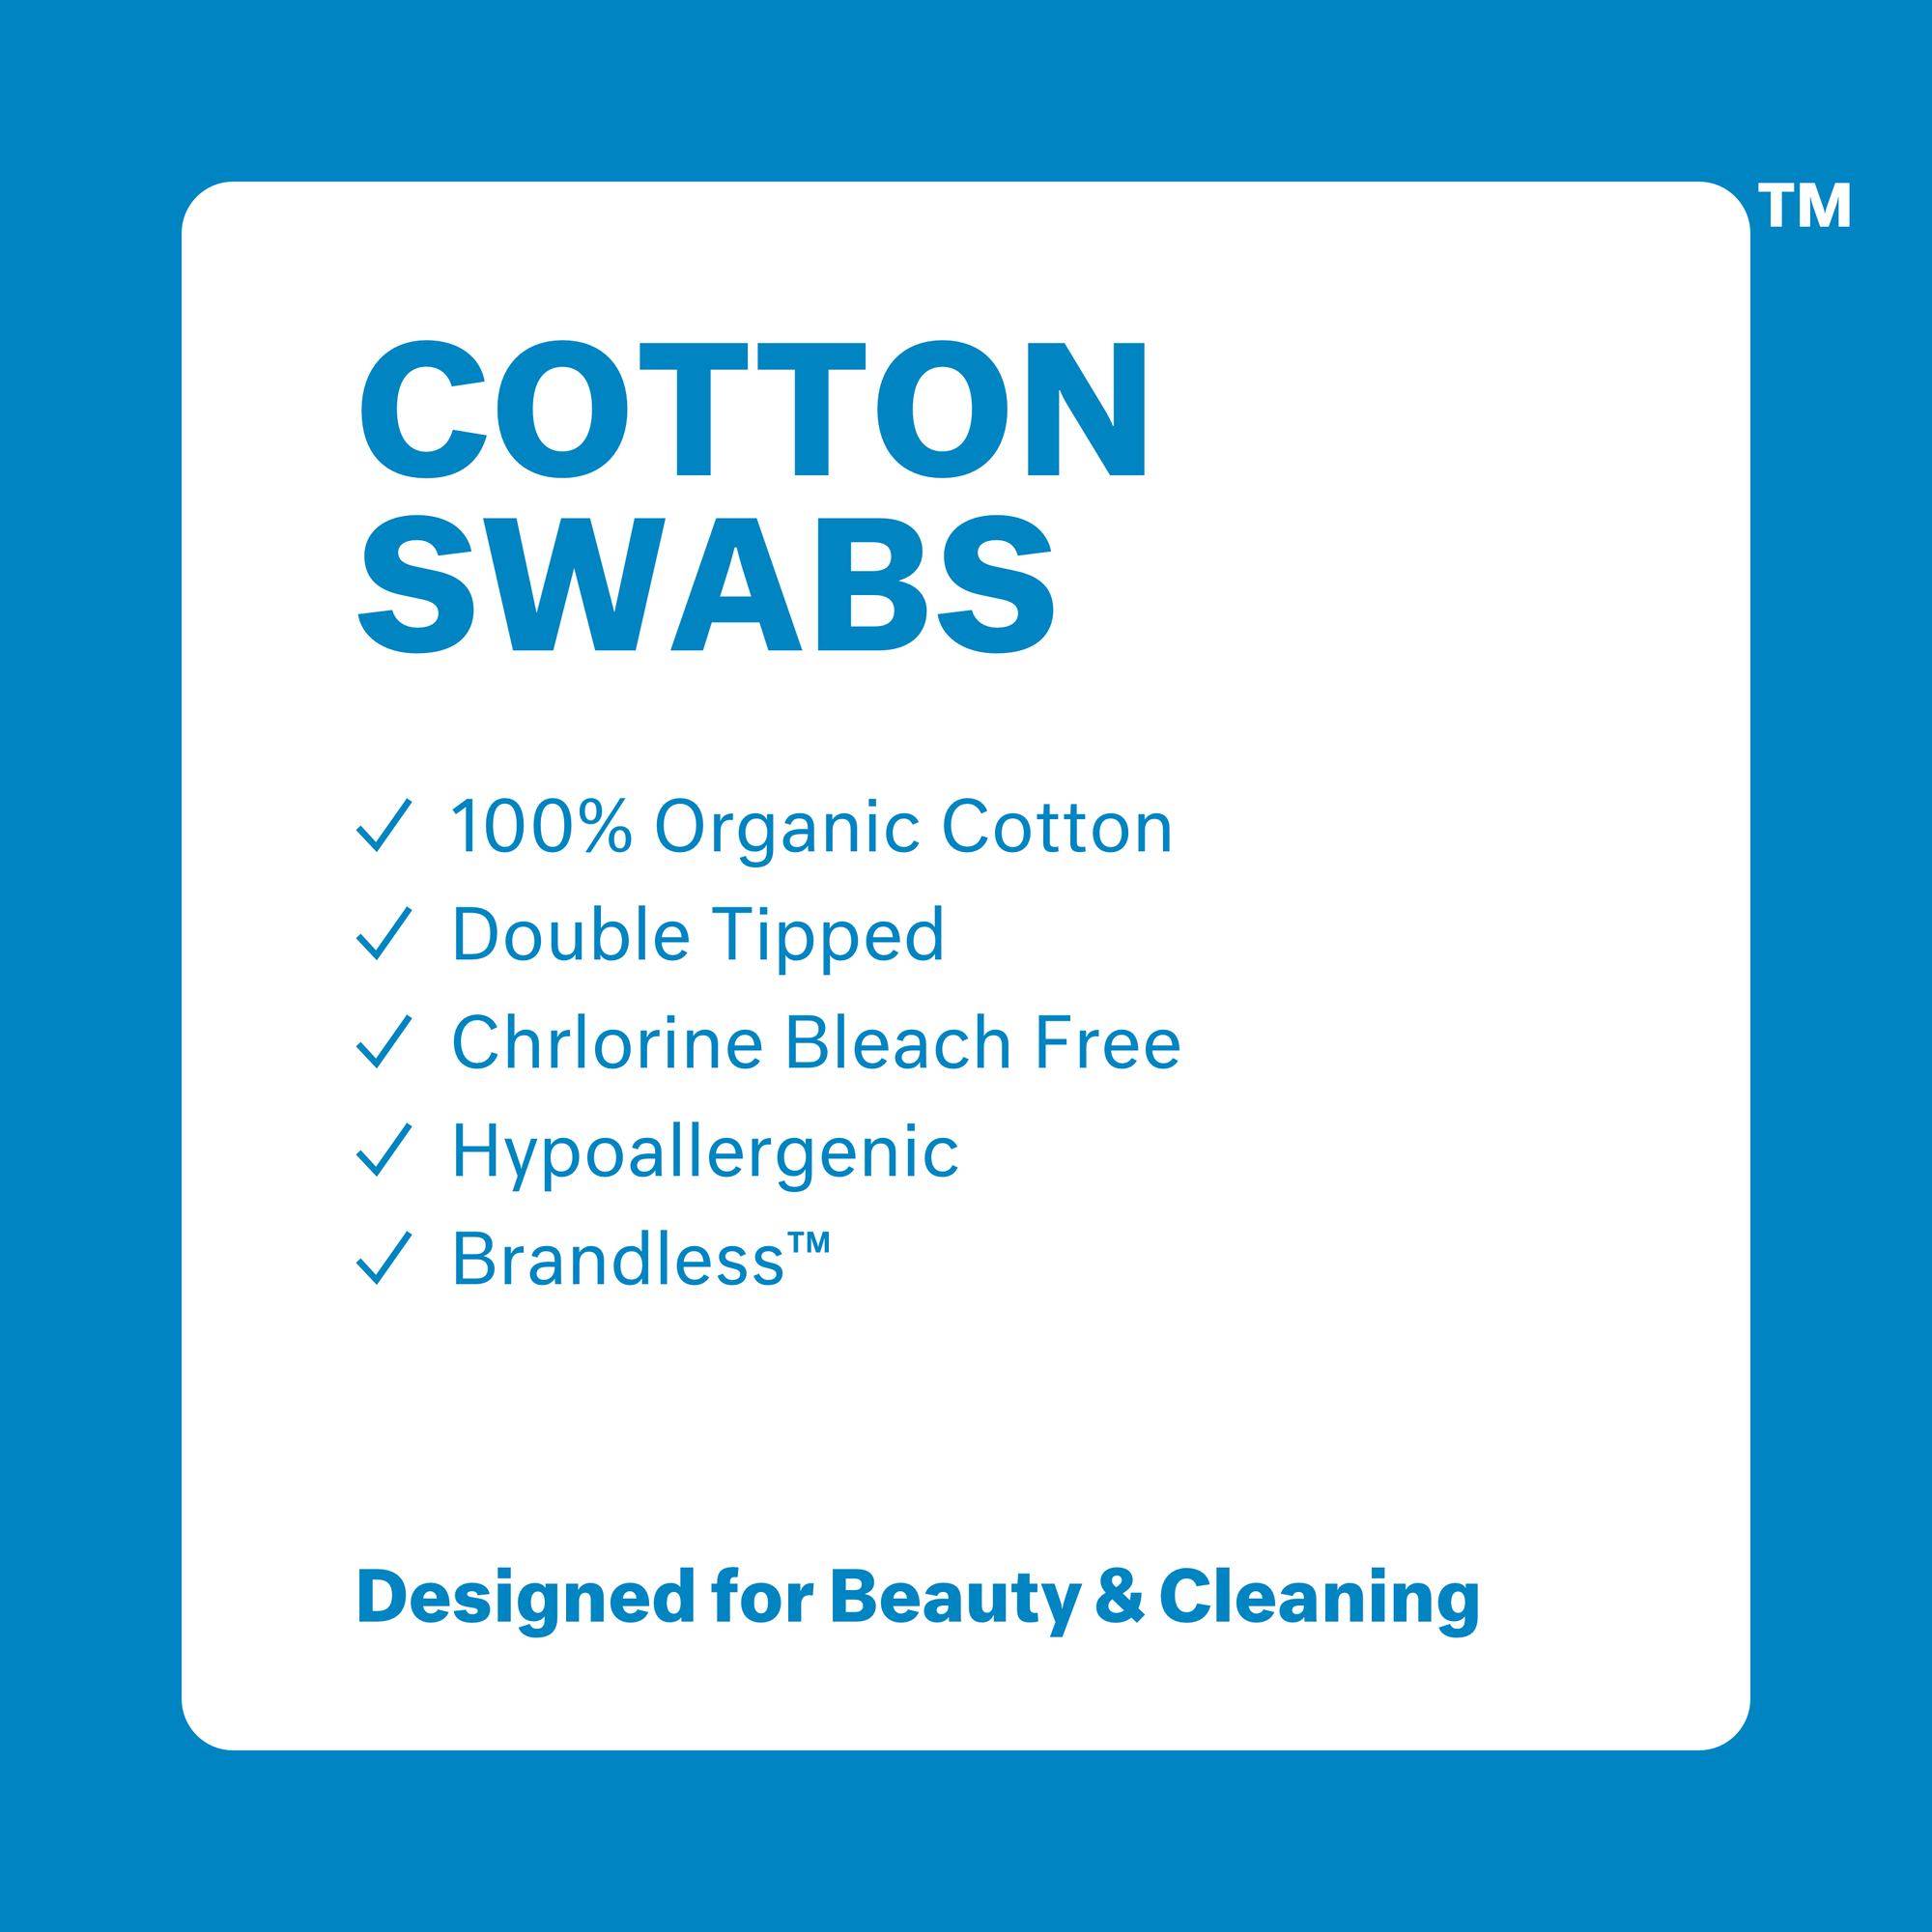 Cotton Swabs. 100% organic cotton. double tipped. chlorine bleach free. hypoallergenic. Brandless. 200 Cotton Swabs.